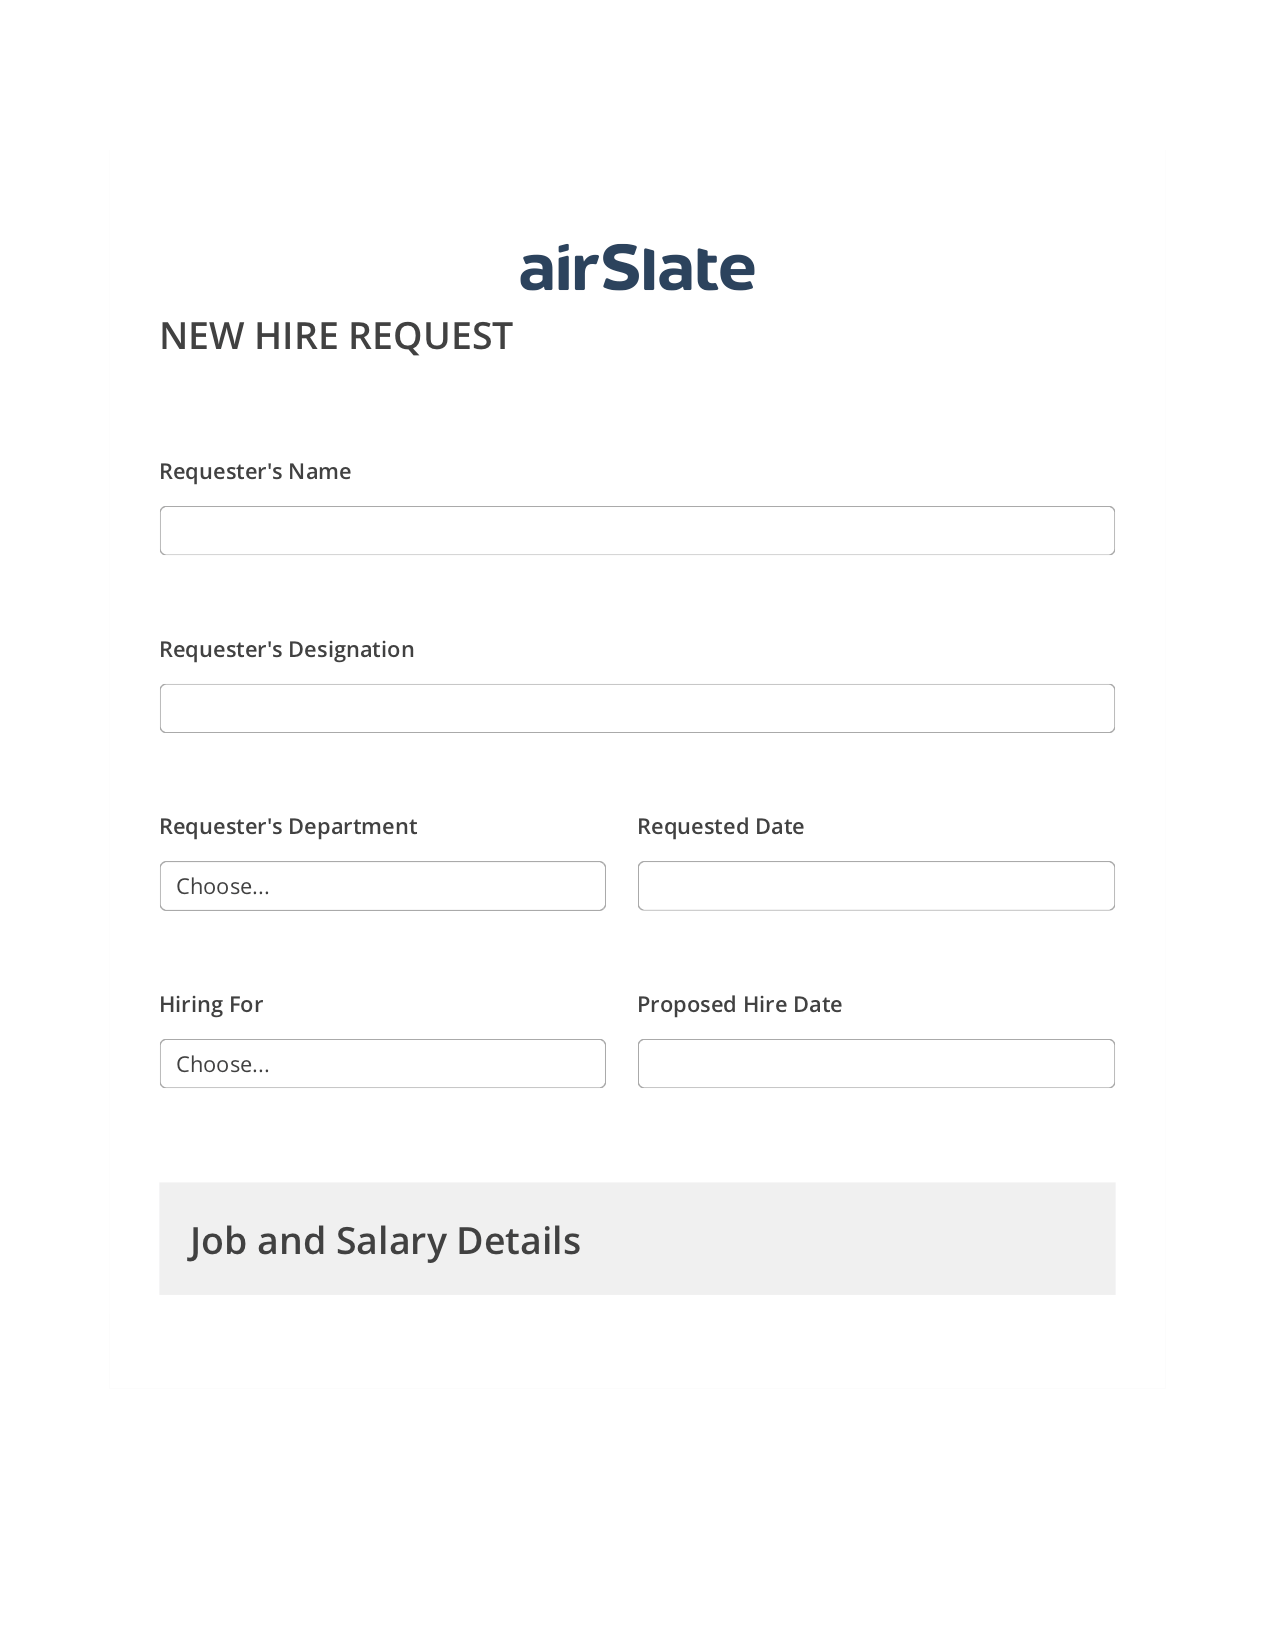 Hiring Request Workflow Pre-fill from CSV File Bot, Roles Reminder Bot, Post-finish Document Bot